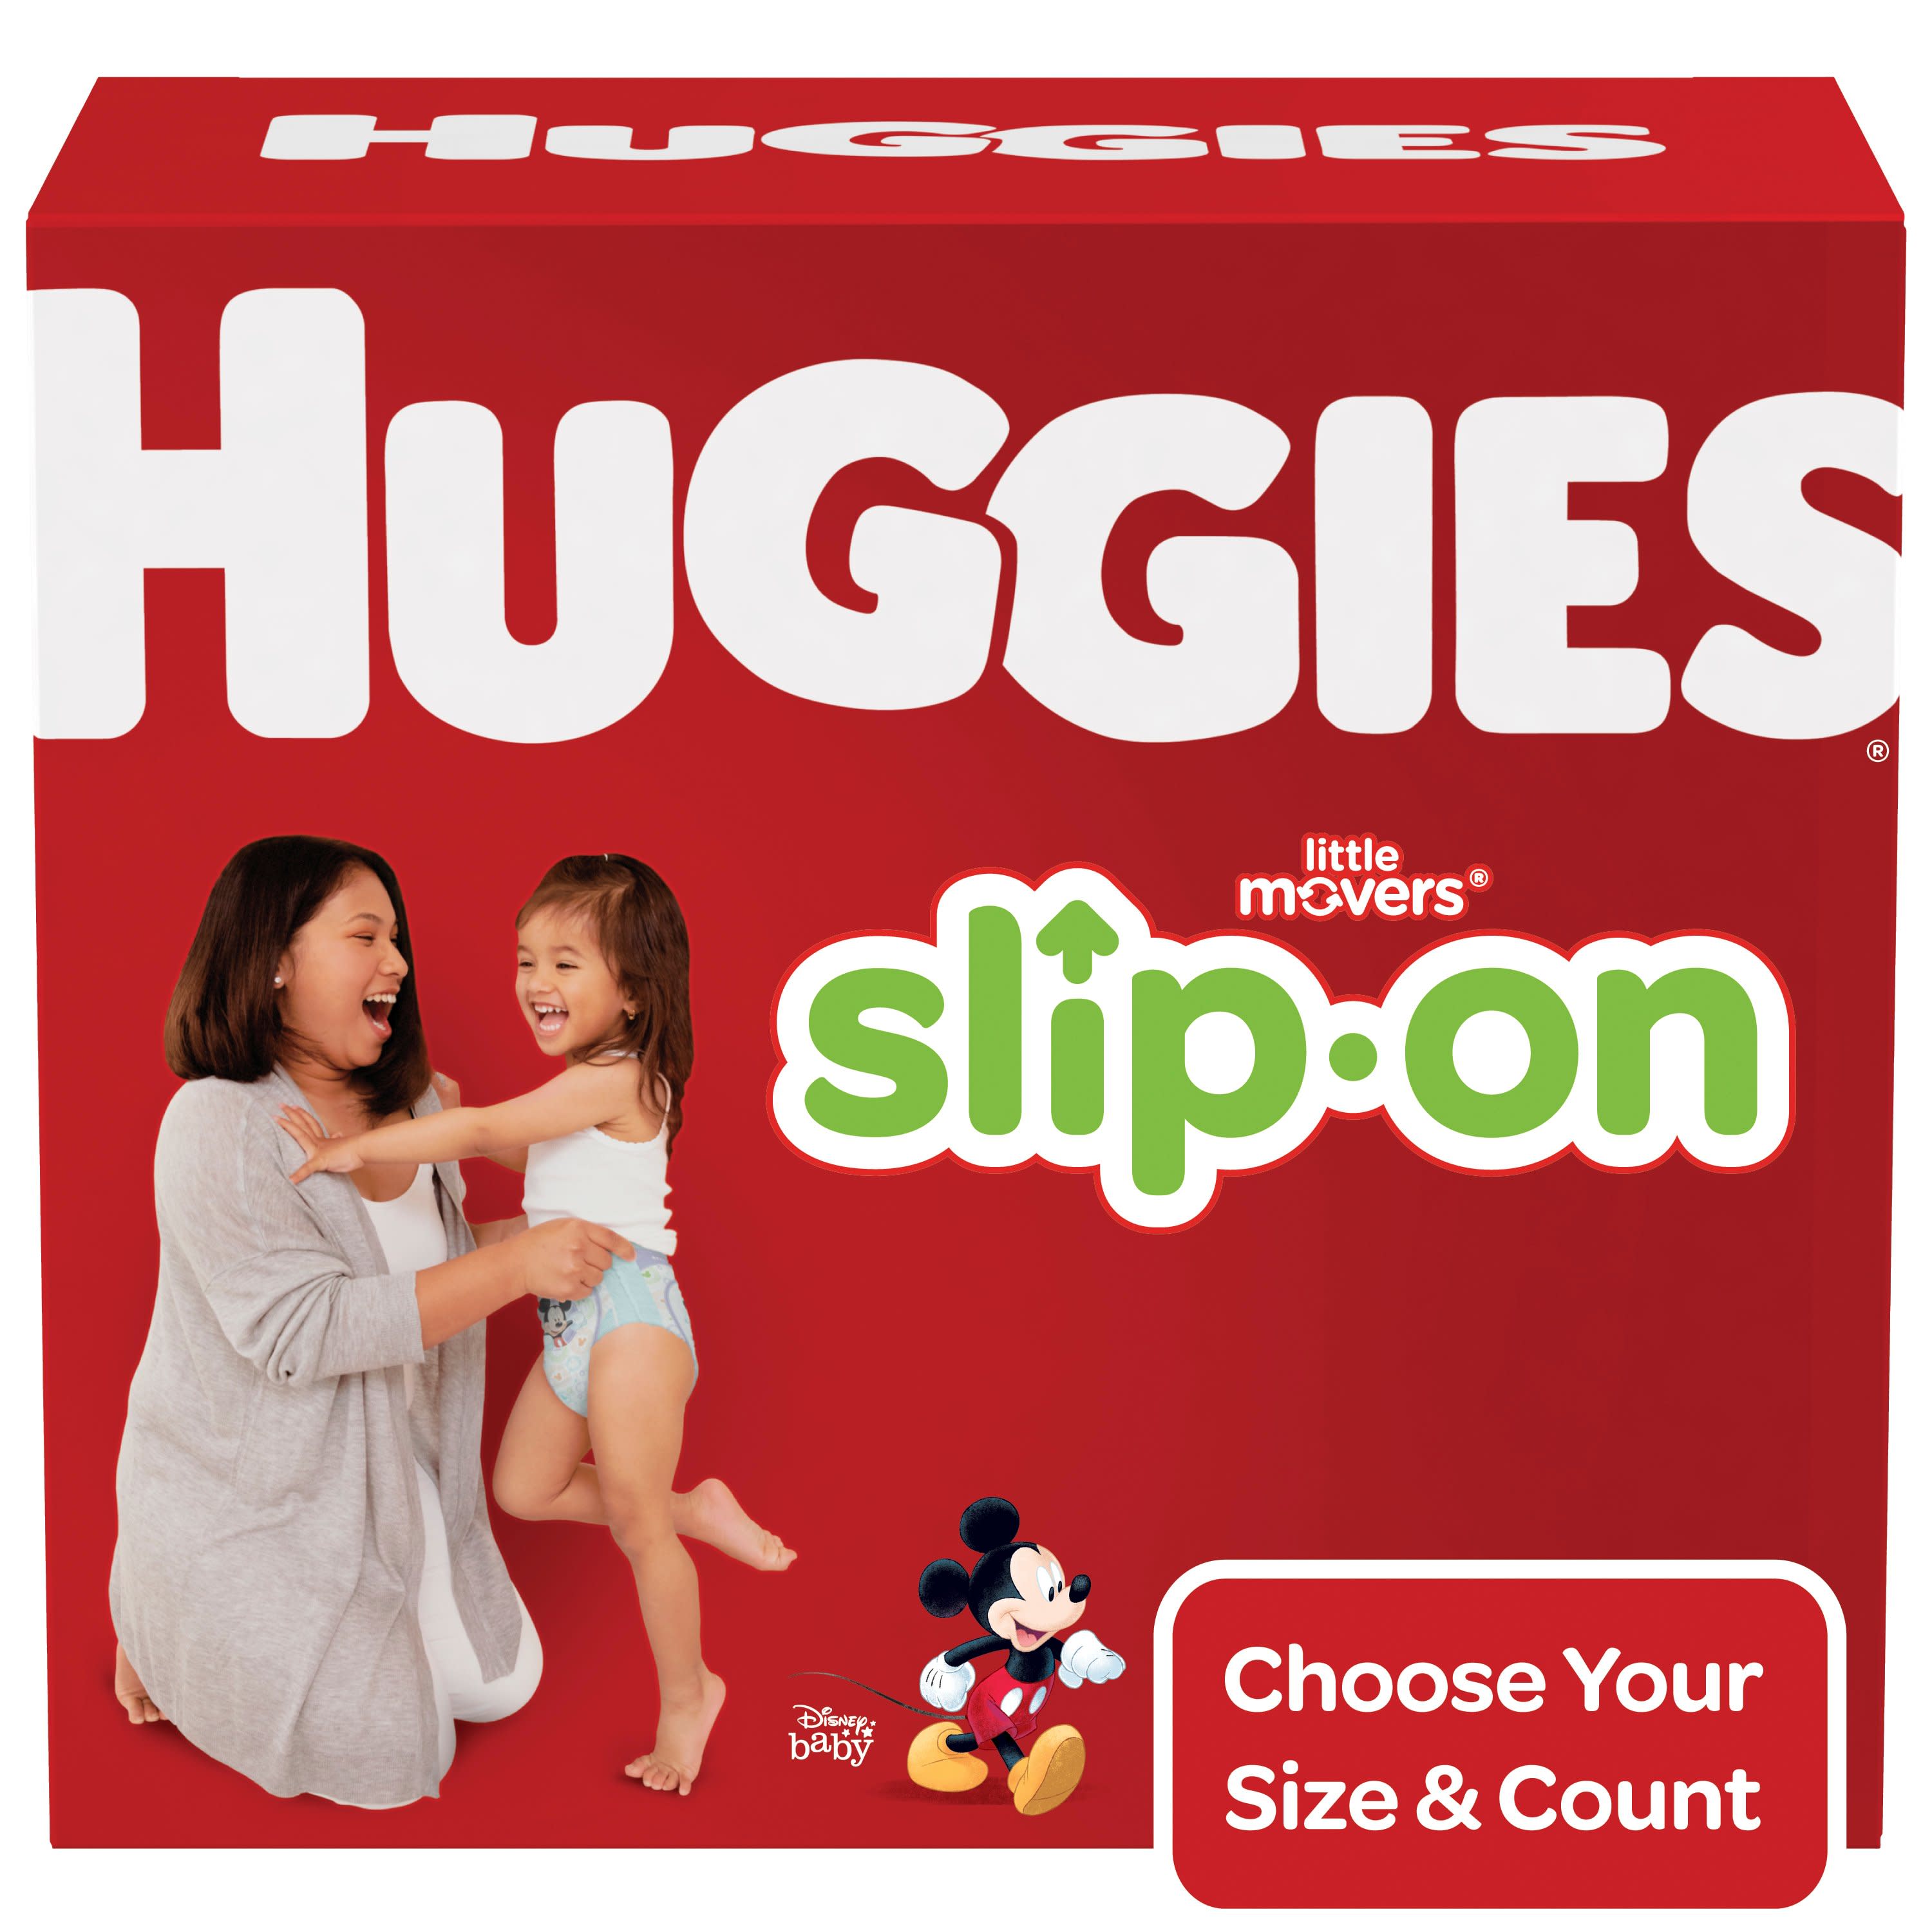 Huggies Little Movers Slip-On Diaper Pants, Size 5, 128 Ct - image 1 of 9